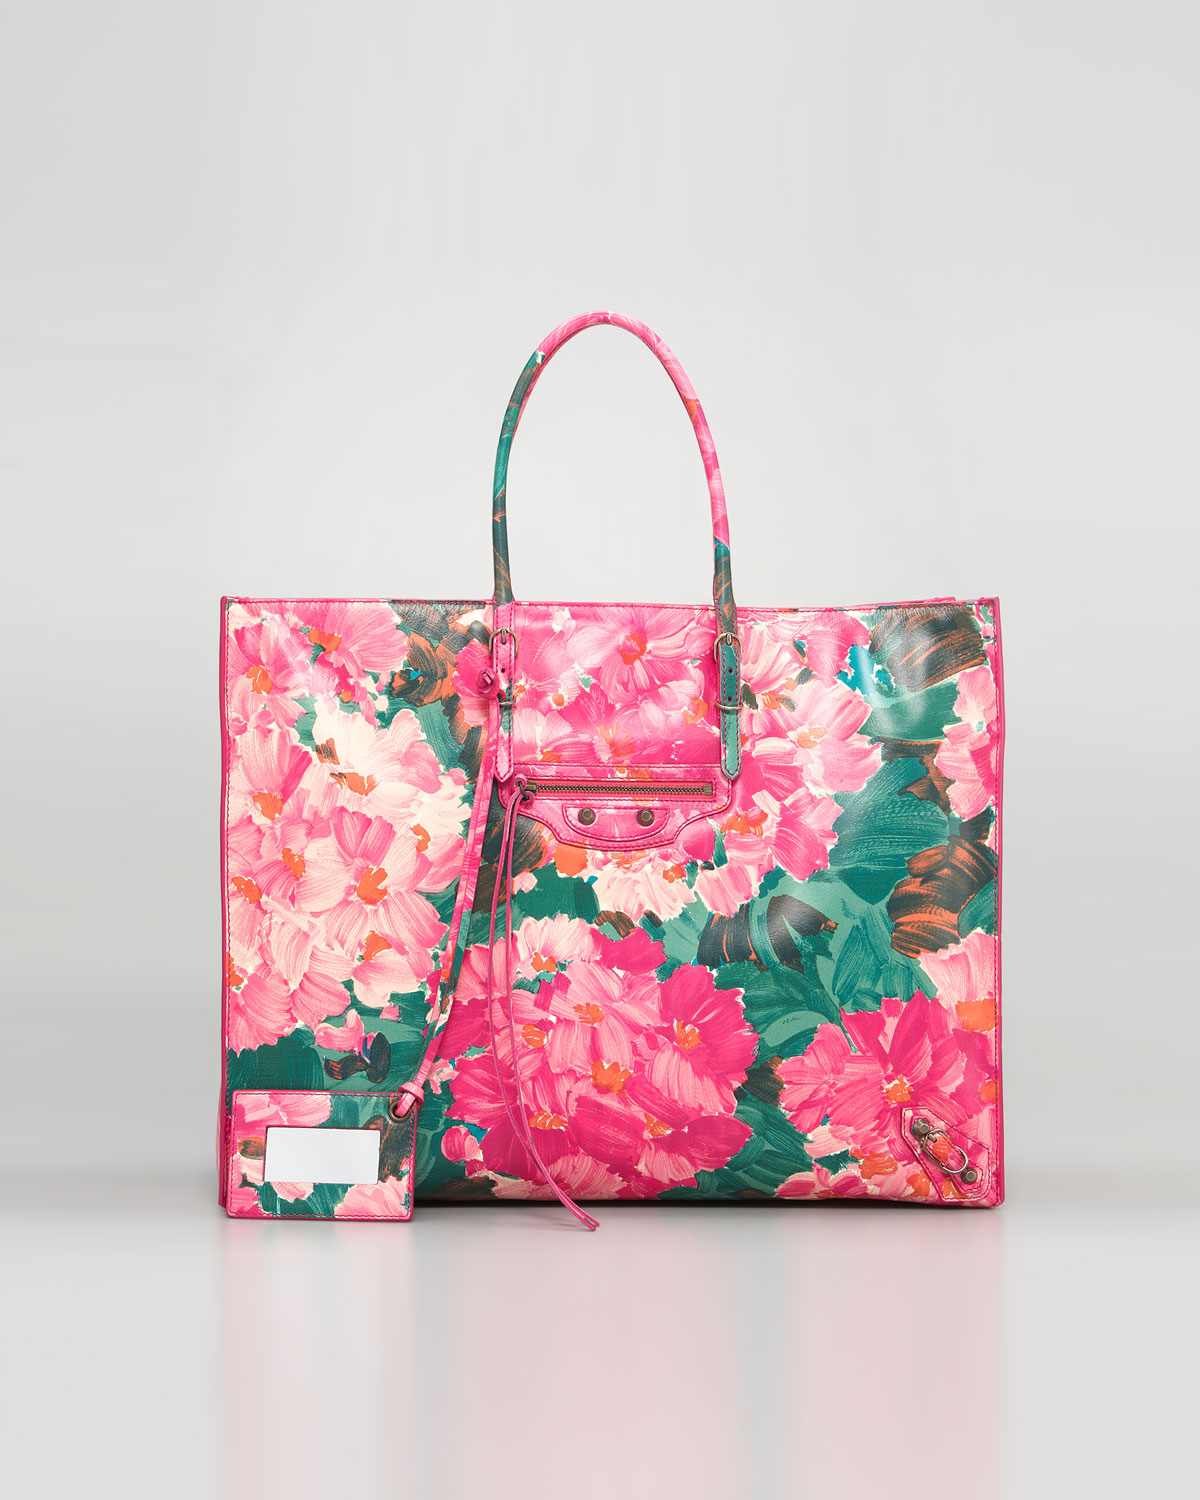 Lyst - Balenciaga Papier Leather Tote Floral